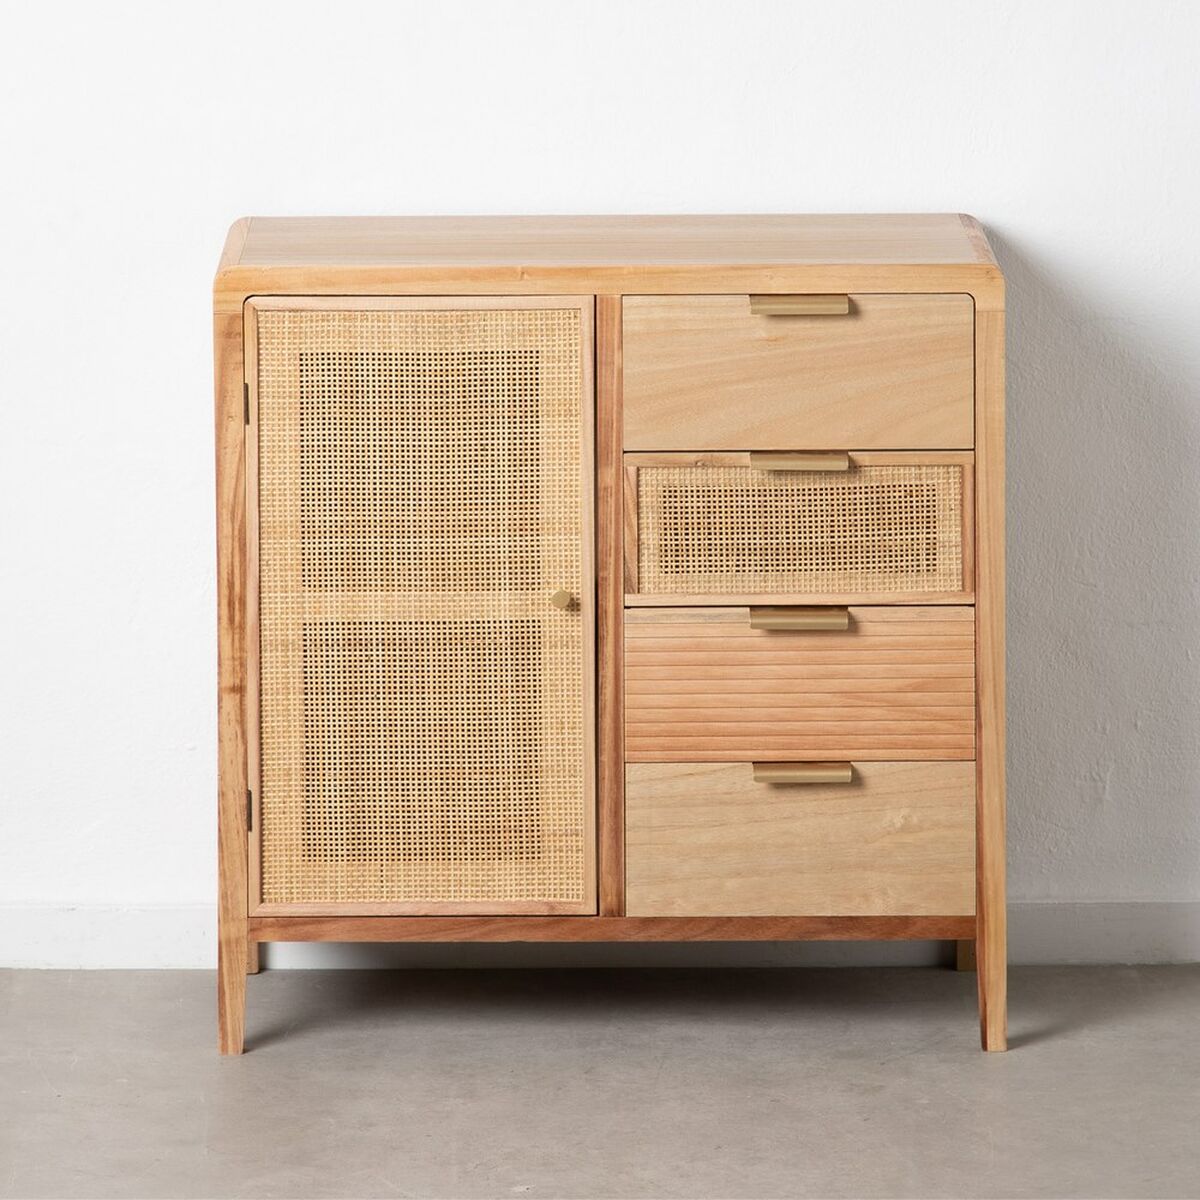 Hall Table with Drawers and Shelves in Wood and Rattan (80 x 40 x 82 cm)